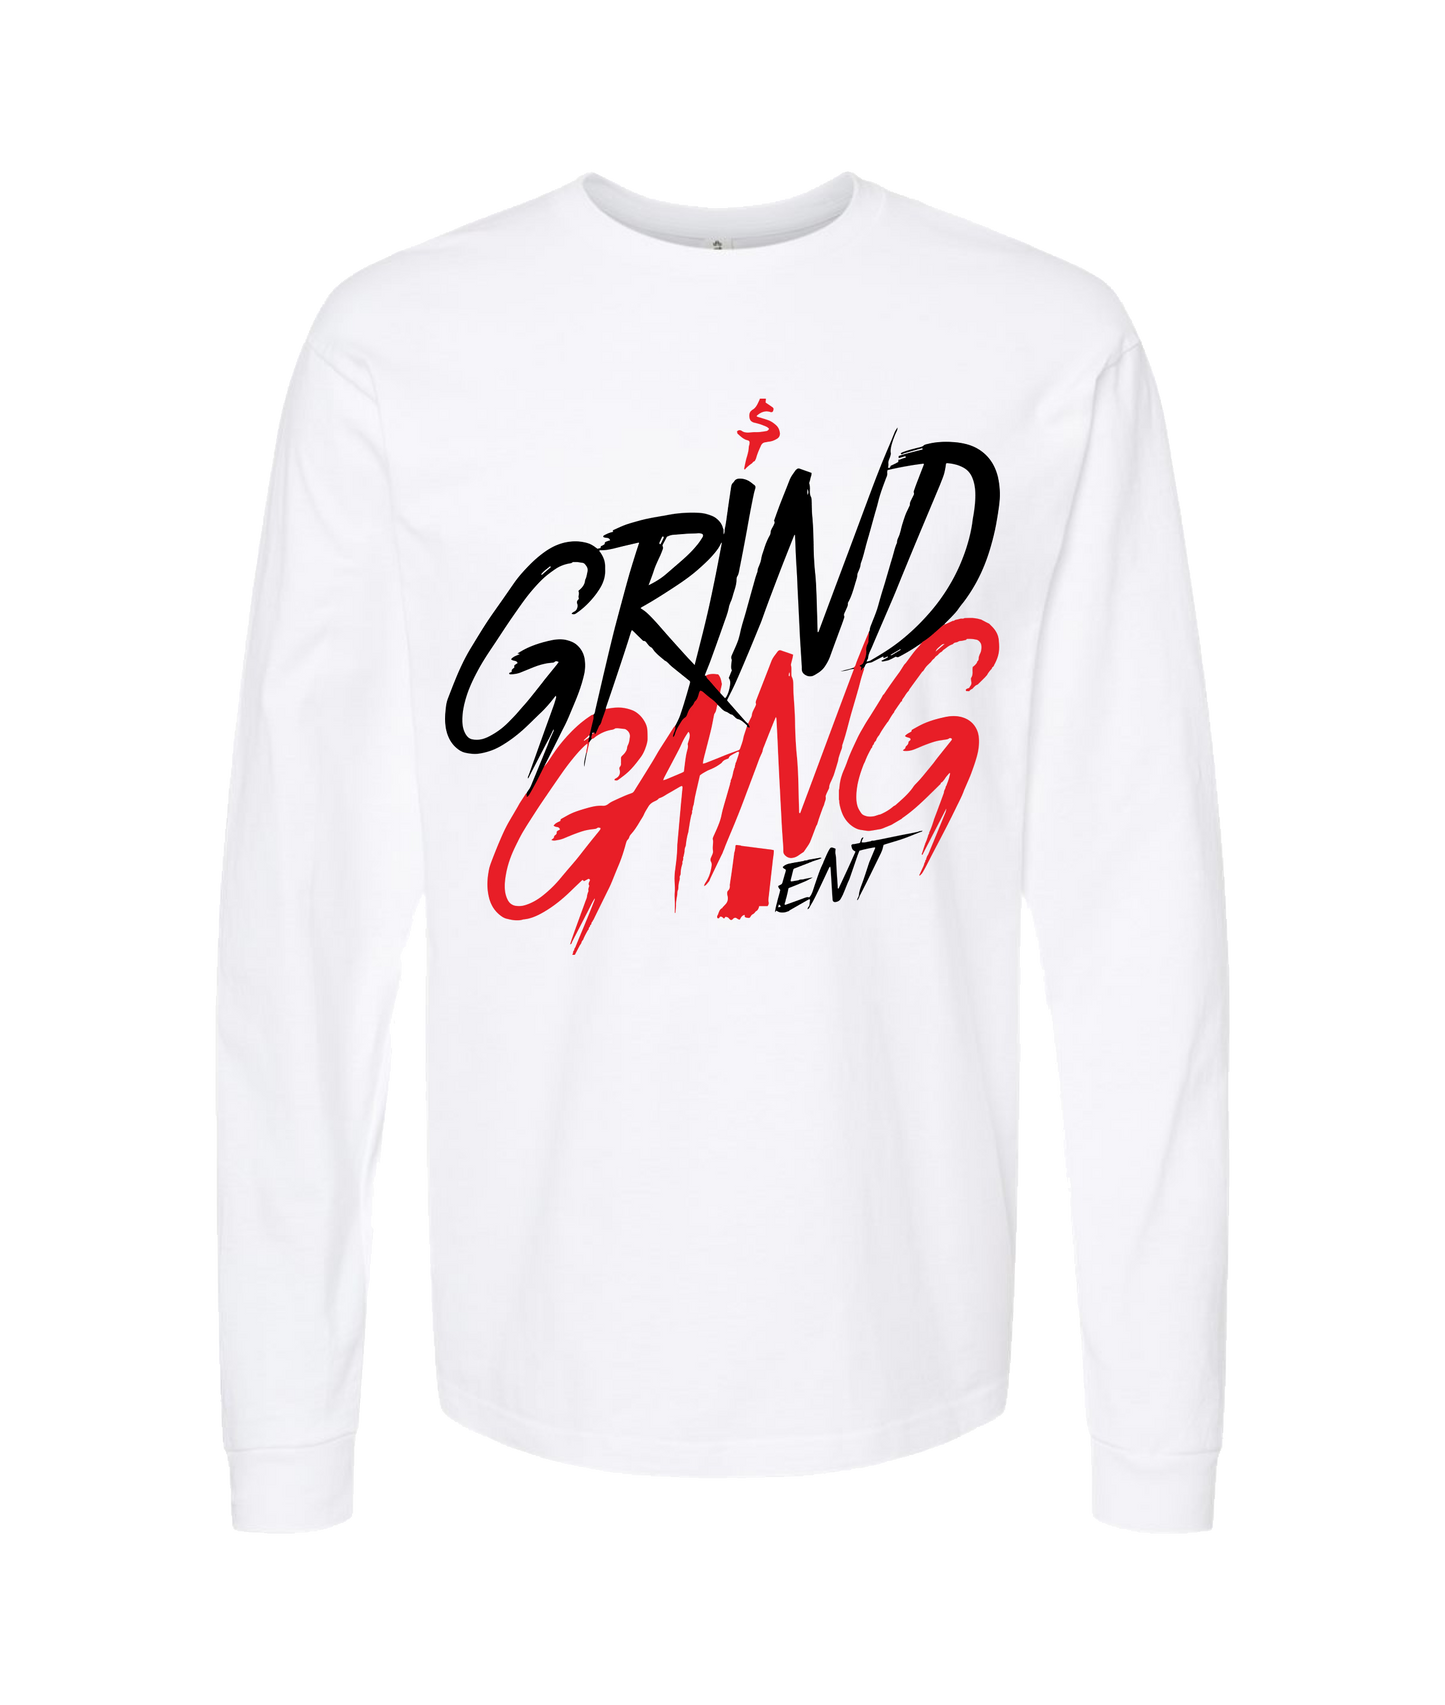 V-GGETOP - INDIANA GRIND 1 - White Long Sleeve T